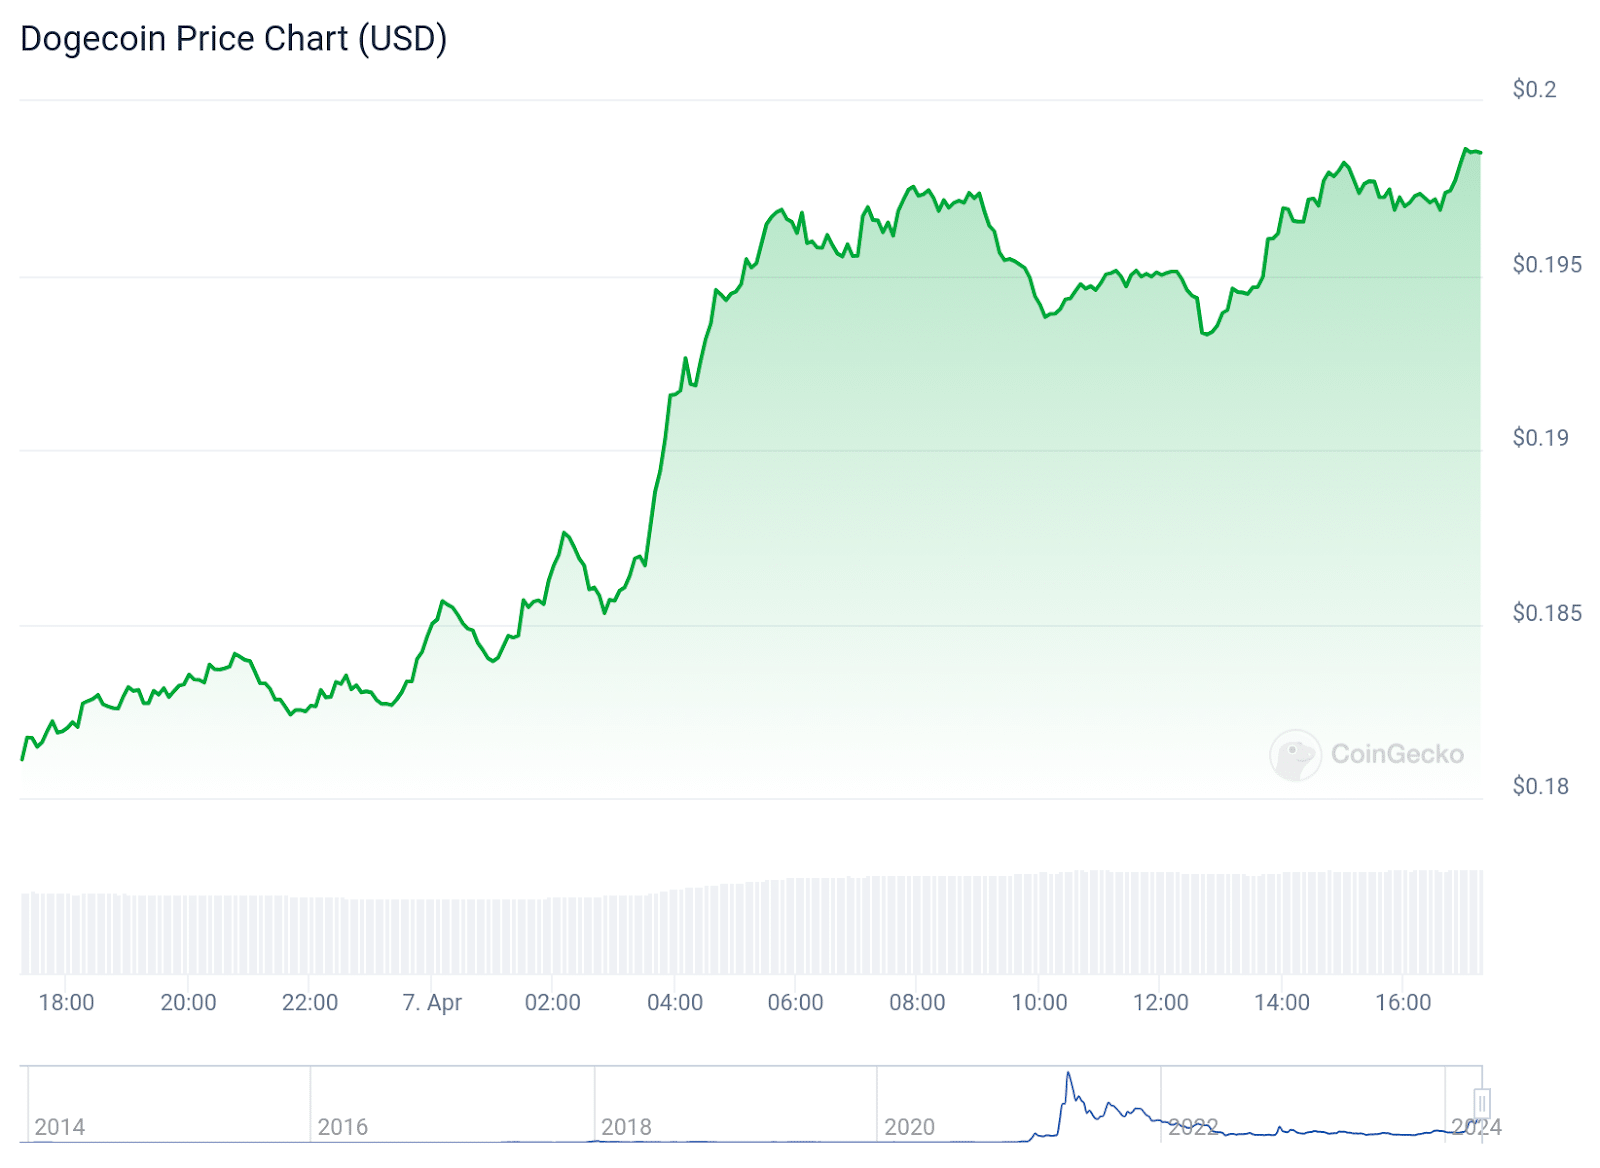 Dogecoin surges over 10% to cross $0.20 mark: - 1